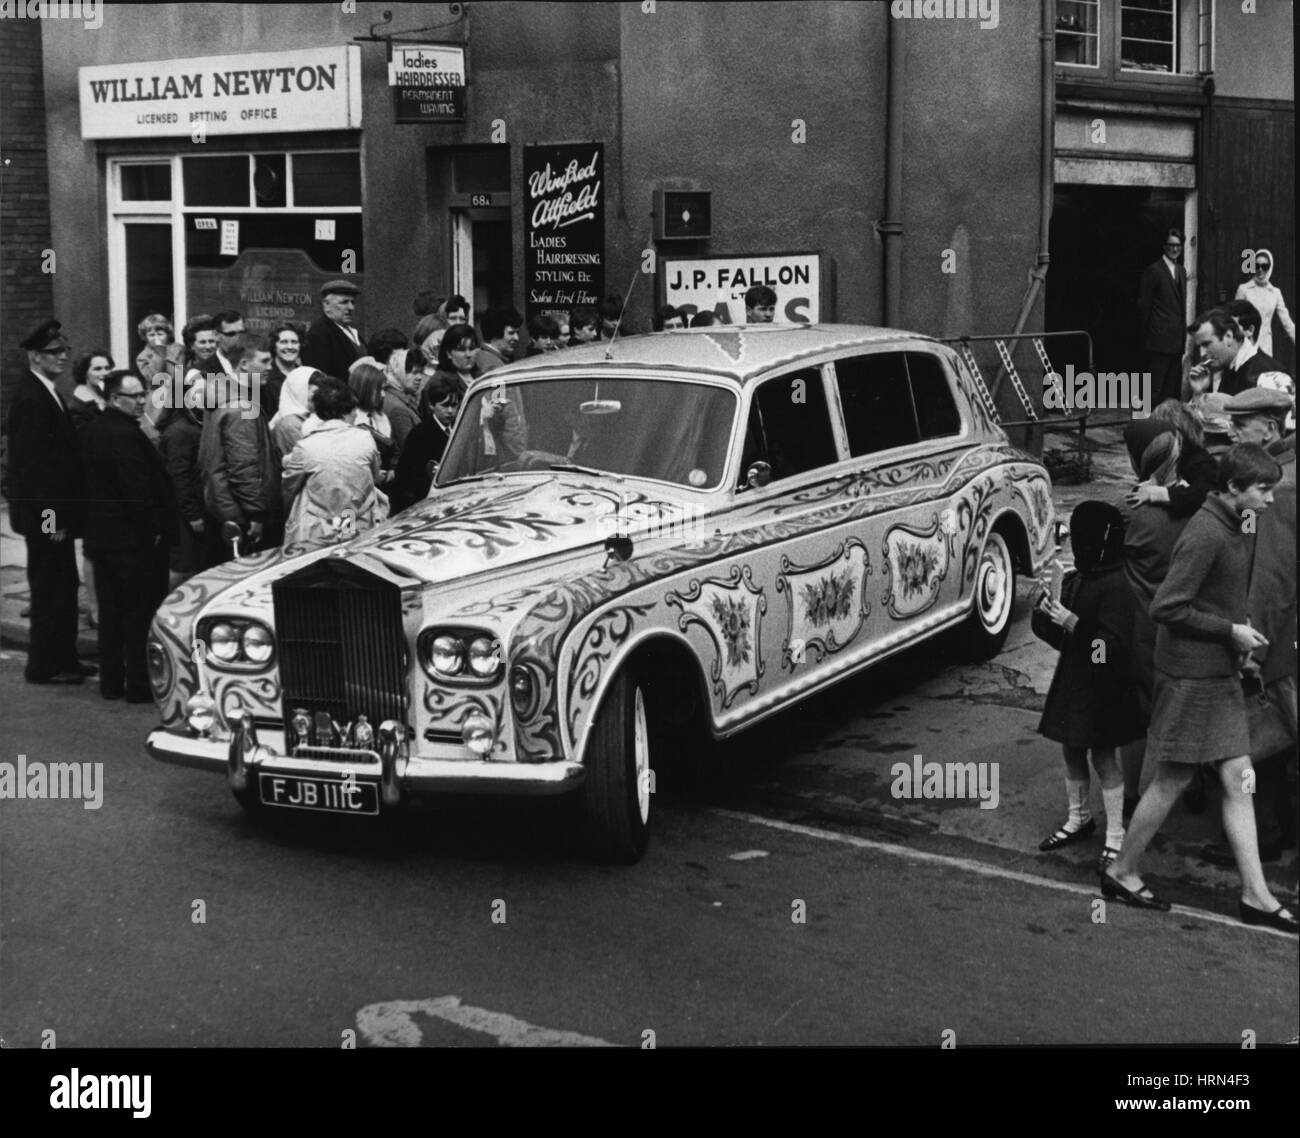 May 05, 1967 - John Lennon's decorated Rolls Royce: Beatle John lennon yesterday took delivery of his re-decorated Rolls Yesterday. It has been painted yellow, with signs of the zodiac and bunches of flowers in red, green and blue on the roof and the doors. The wheels are in red, white, blue and orange. Photo shows John Lennon's decorated Rolls Royce, pictured in Chertsey, Surrey, yesterday. (Credit Image: © Keystone Press Agency/Keystone USA via ZUMAPRESS.com) Stock Photo